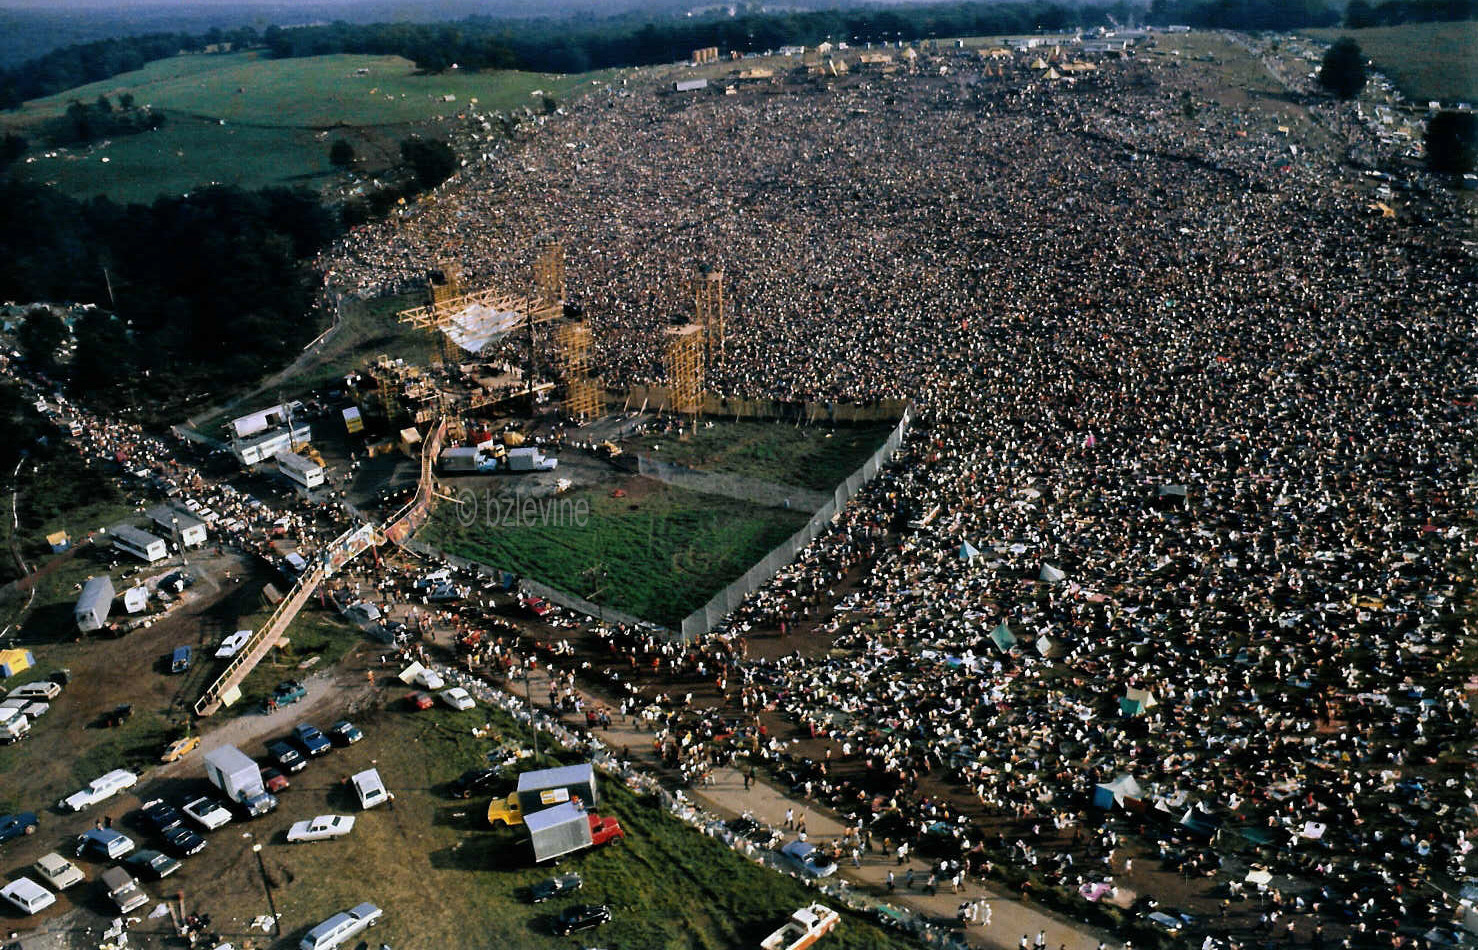 Woodstock Photo of 1969 Festival, View from the helicopter by Woodstock Photographer Barry Z Levine, copyright Barry Z Levine, all rights reserved